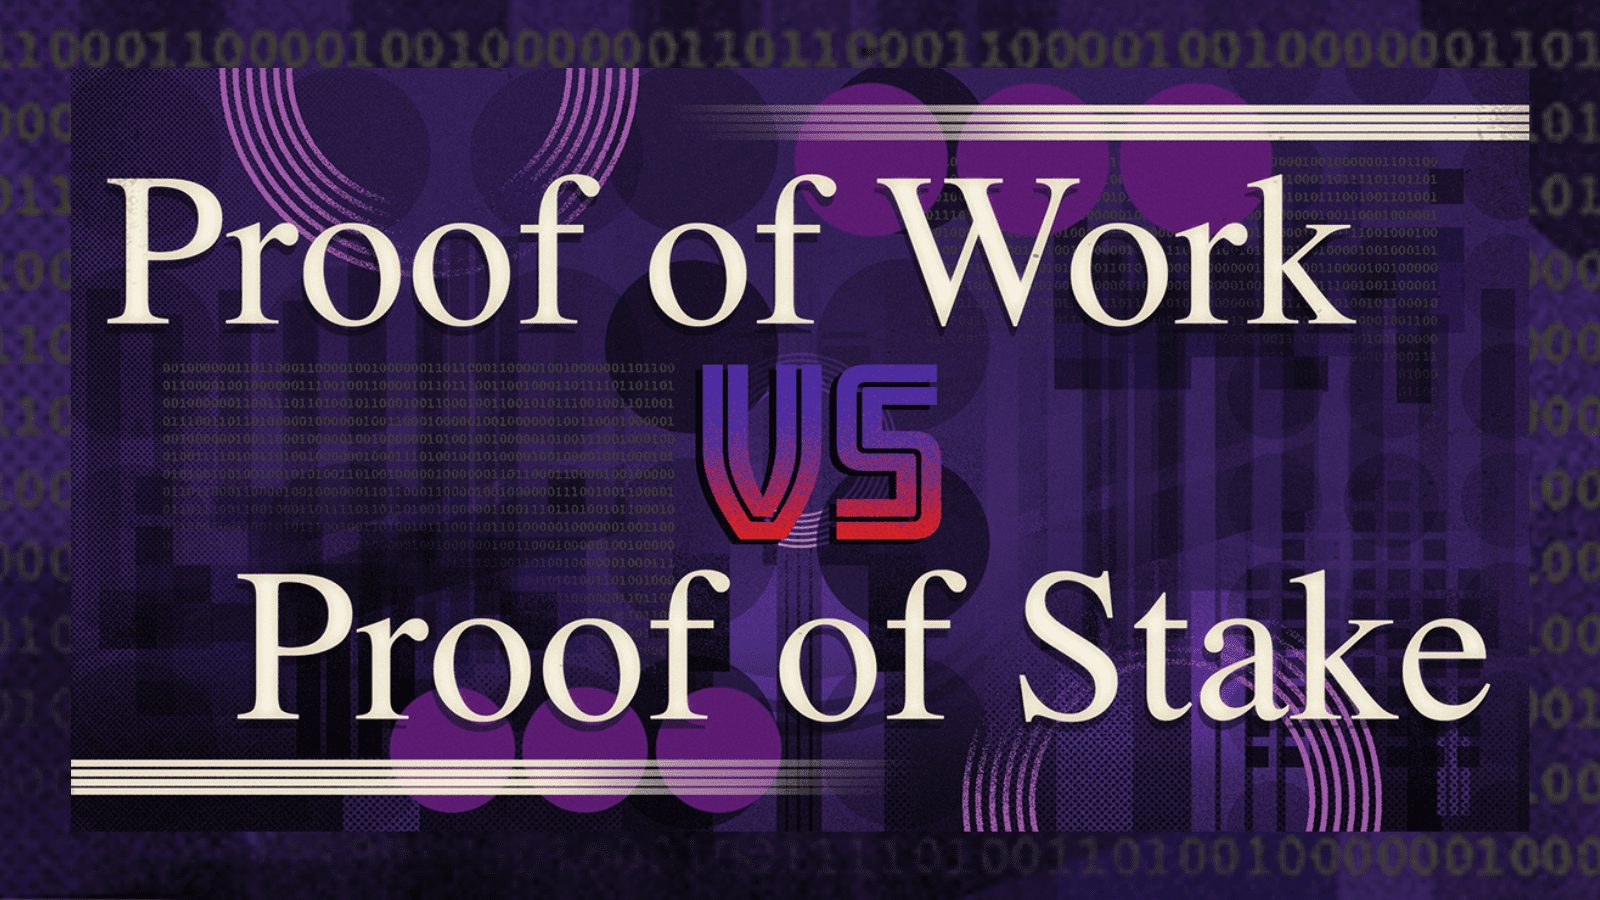 Proof of work proof of stake